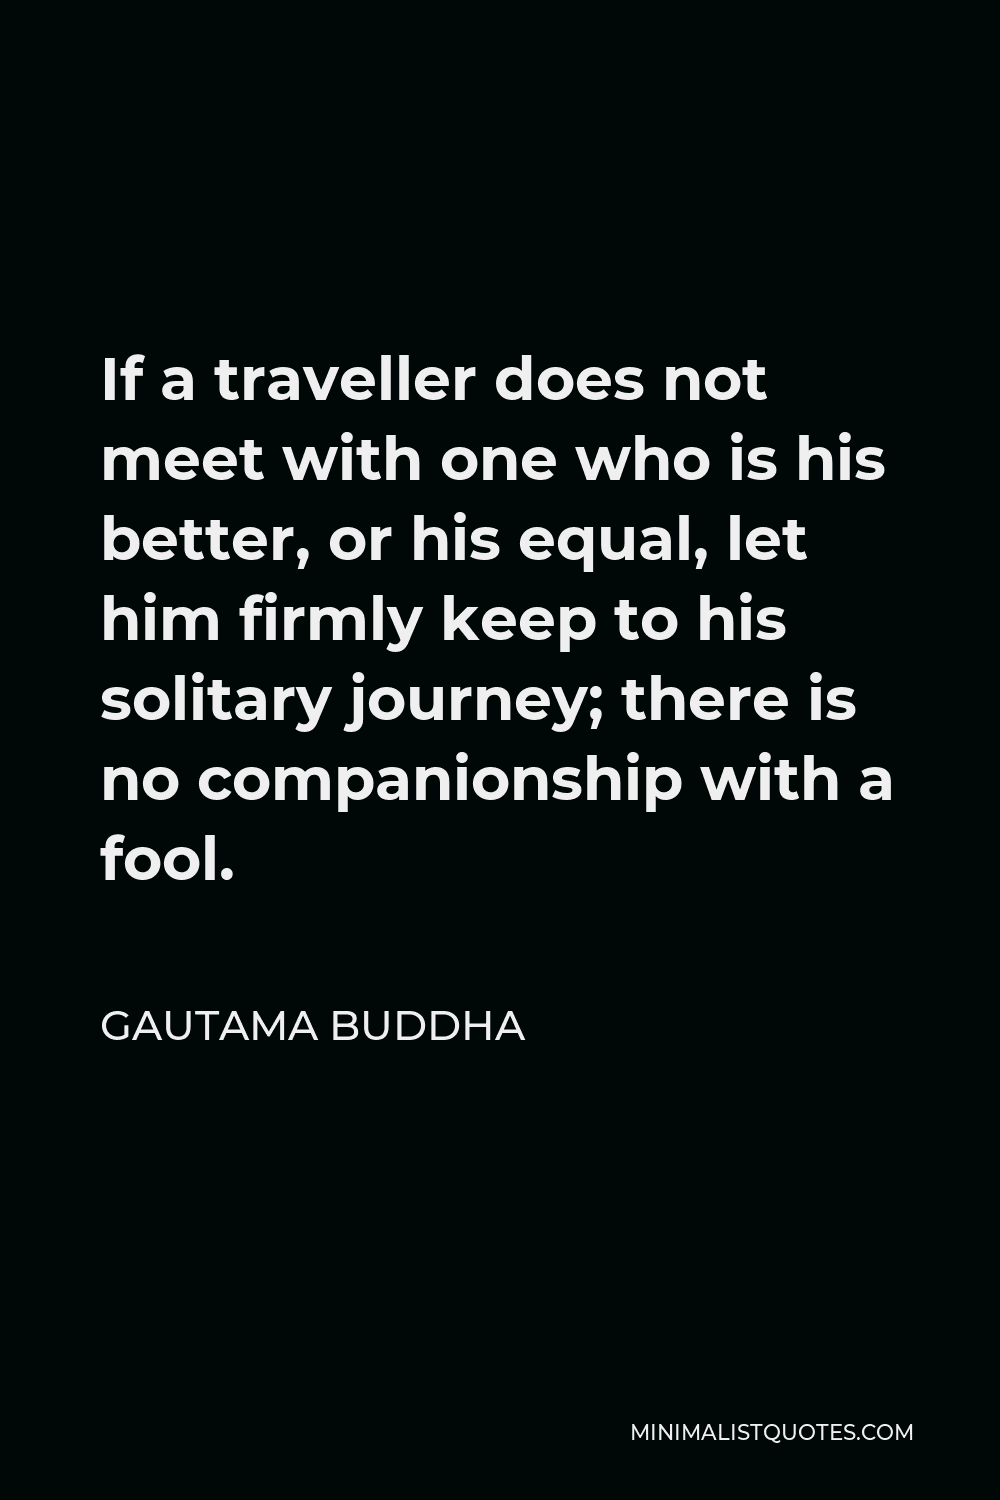 Gautama Buddha Quote - If a traveller does not meet with one who is his better, or his equal, let him firmly keep to his solitary journey; there is no companionship with a fool.